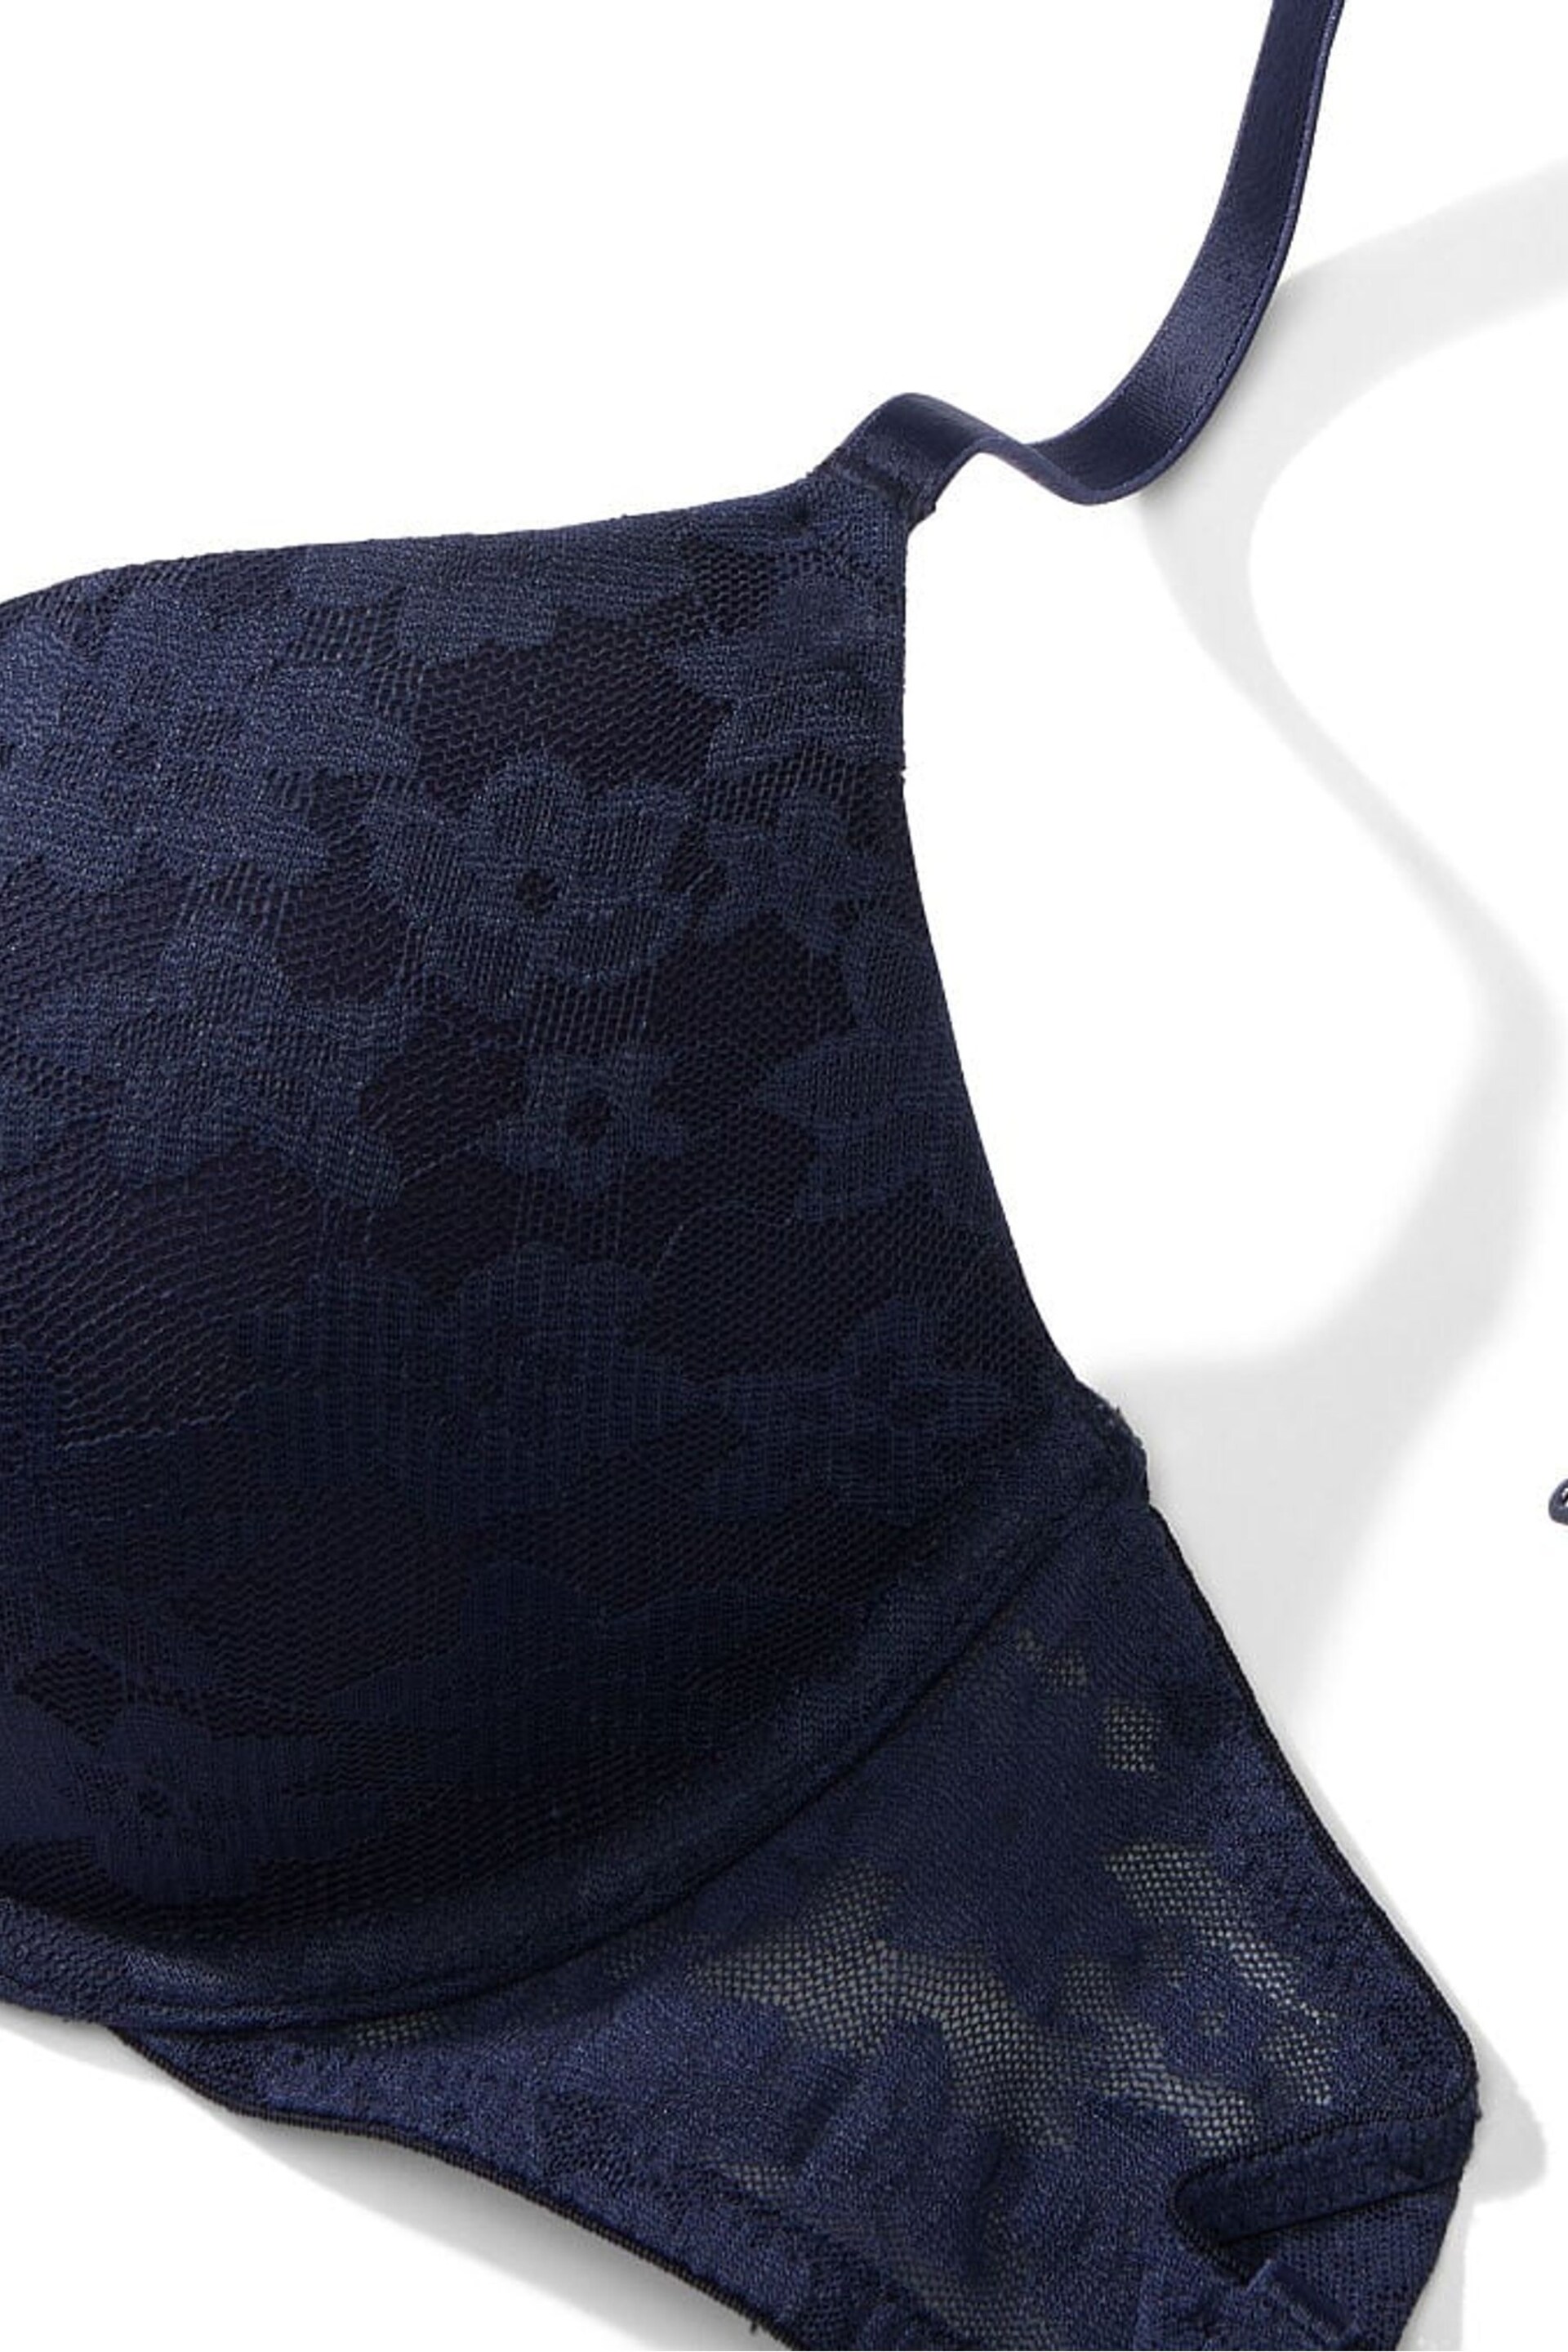 Victoria's Secret PINK Midnight Navy Blue Floral Lace Lightly Lined Bra - Image 4 of 4